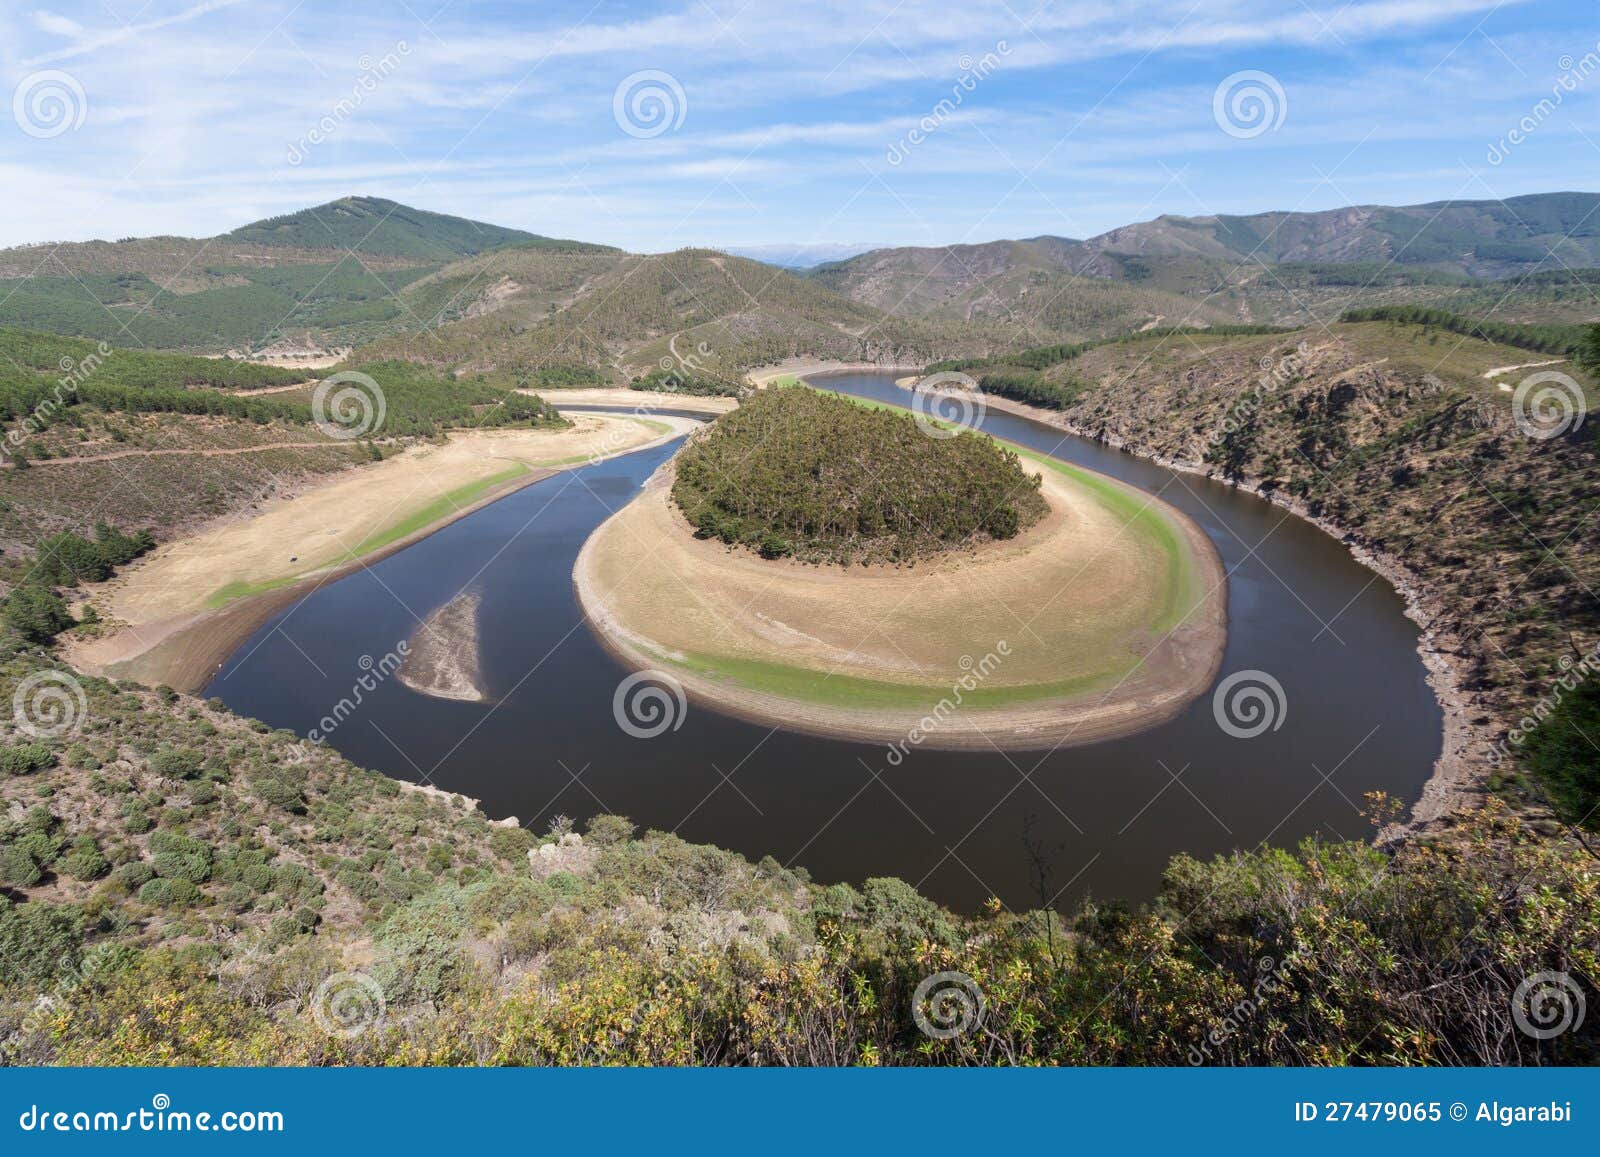 meander of the alagÃÂ³n river in las hurdes